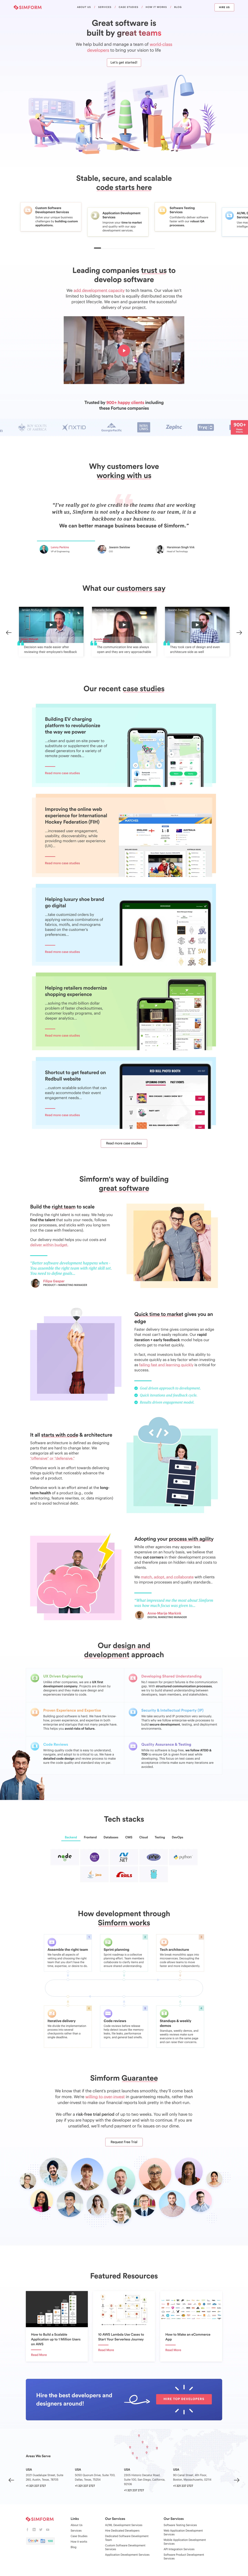 Simform Landing Page Example: Great software is built by great teams. We help build and manage a team of world-class developers to bring your vision to life.